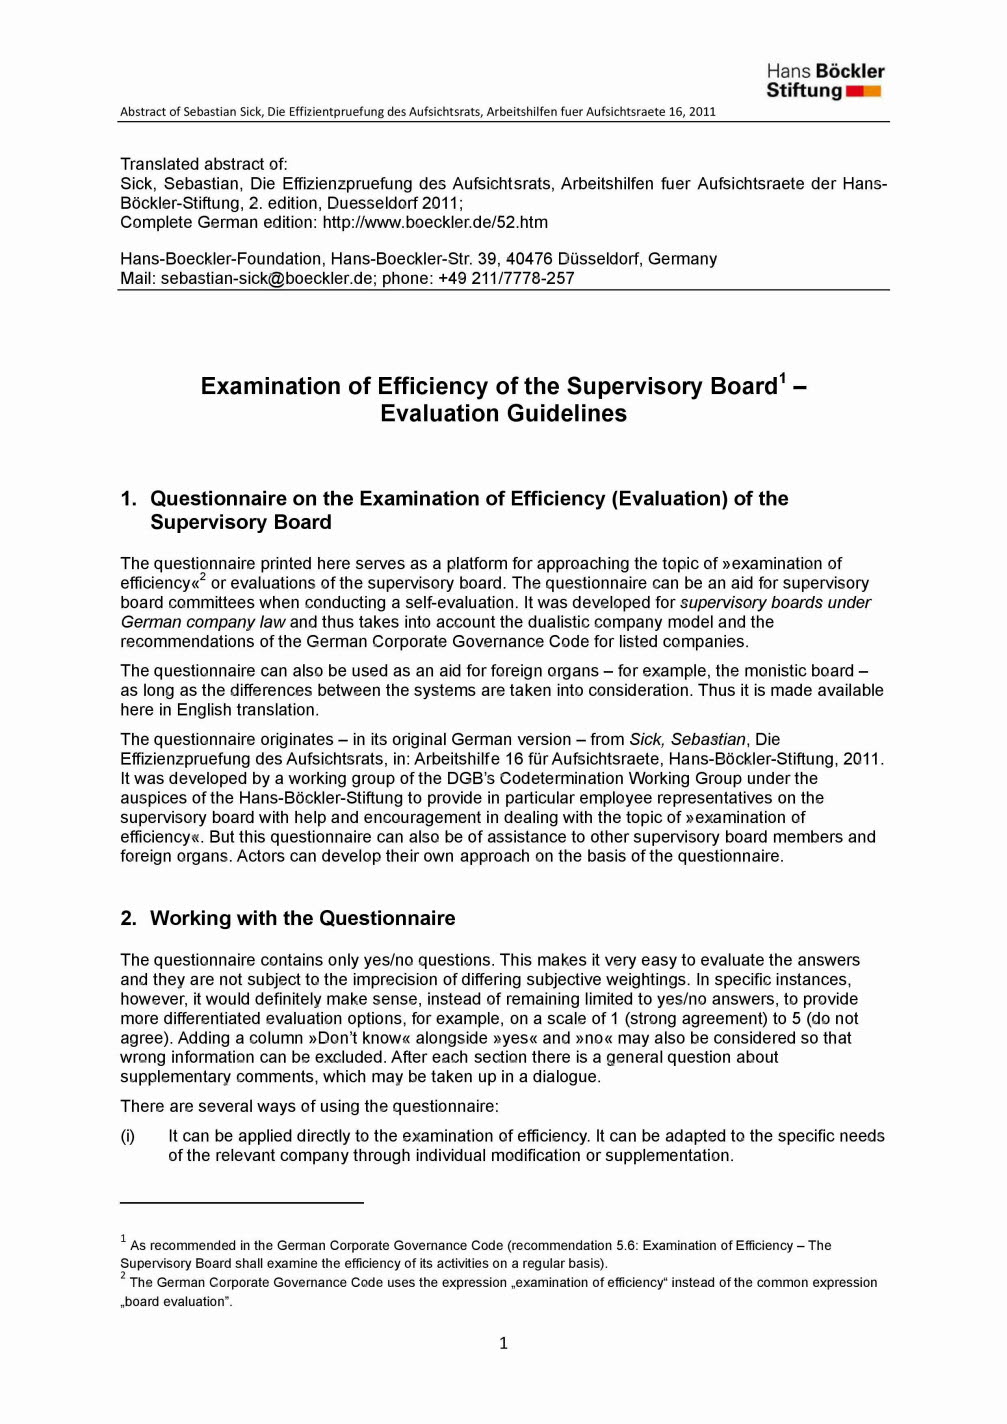 Examination of Efficiency of the Supervisory Board - Evaluation Guidelines